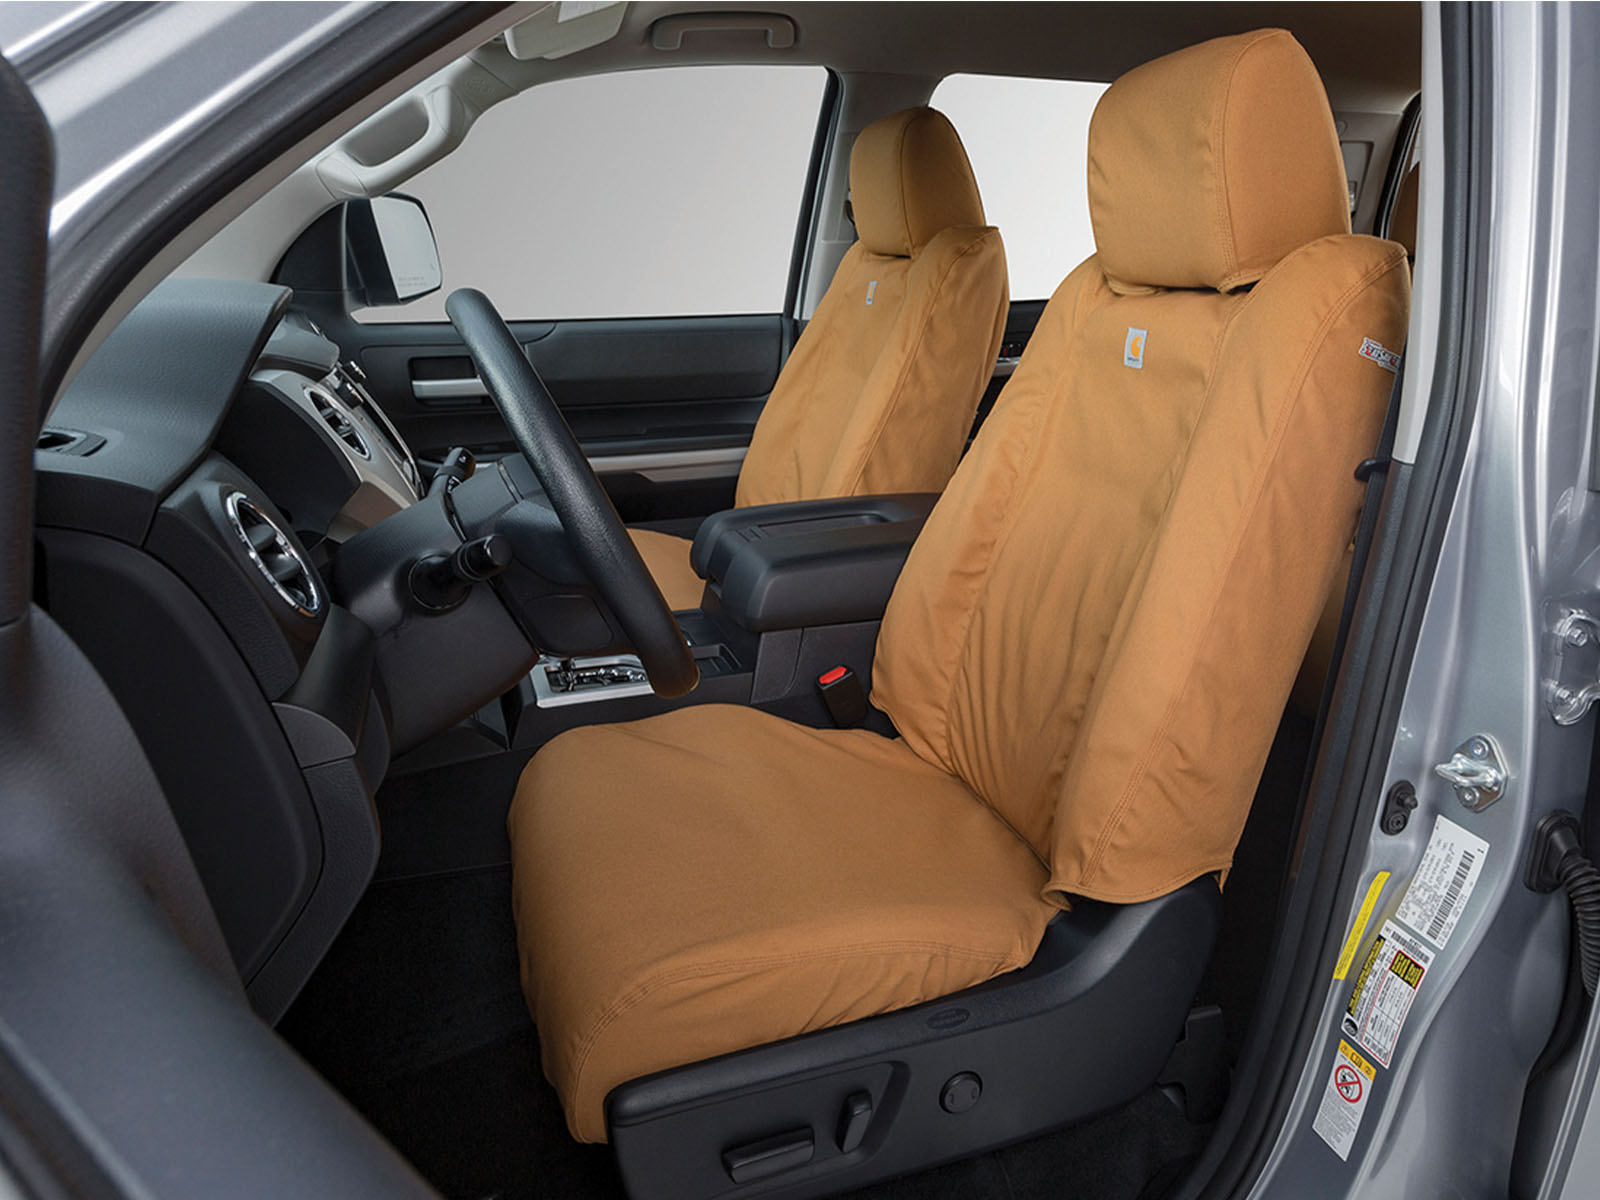 2018 Subaru Forester Seat Covers Realtruck - Best Seat Covers 2018 Subaru Forester